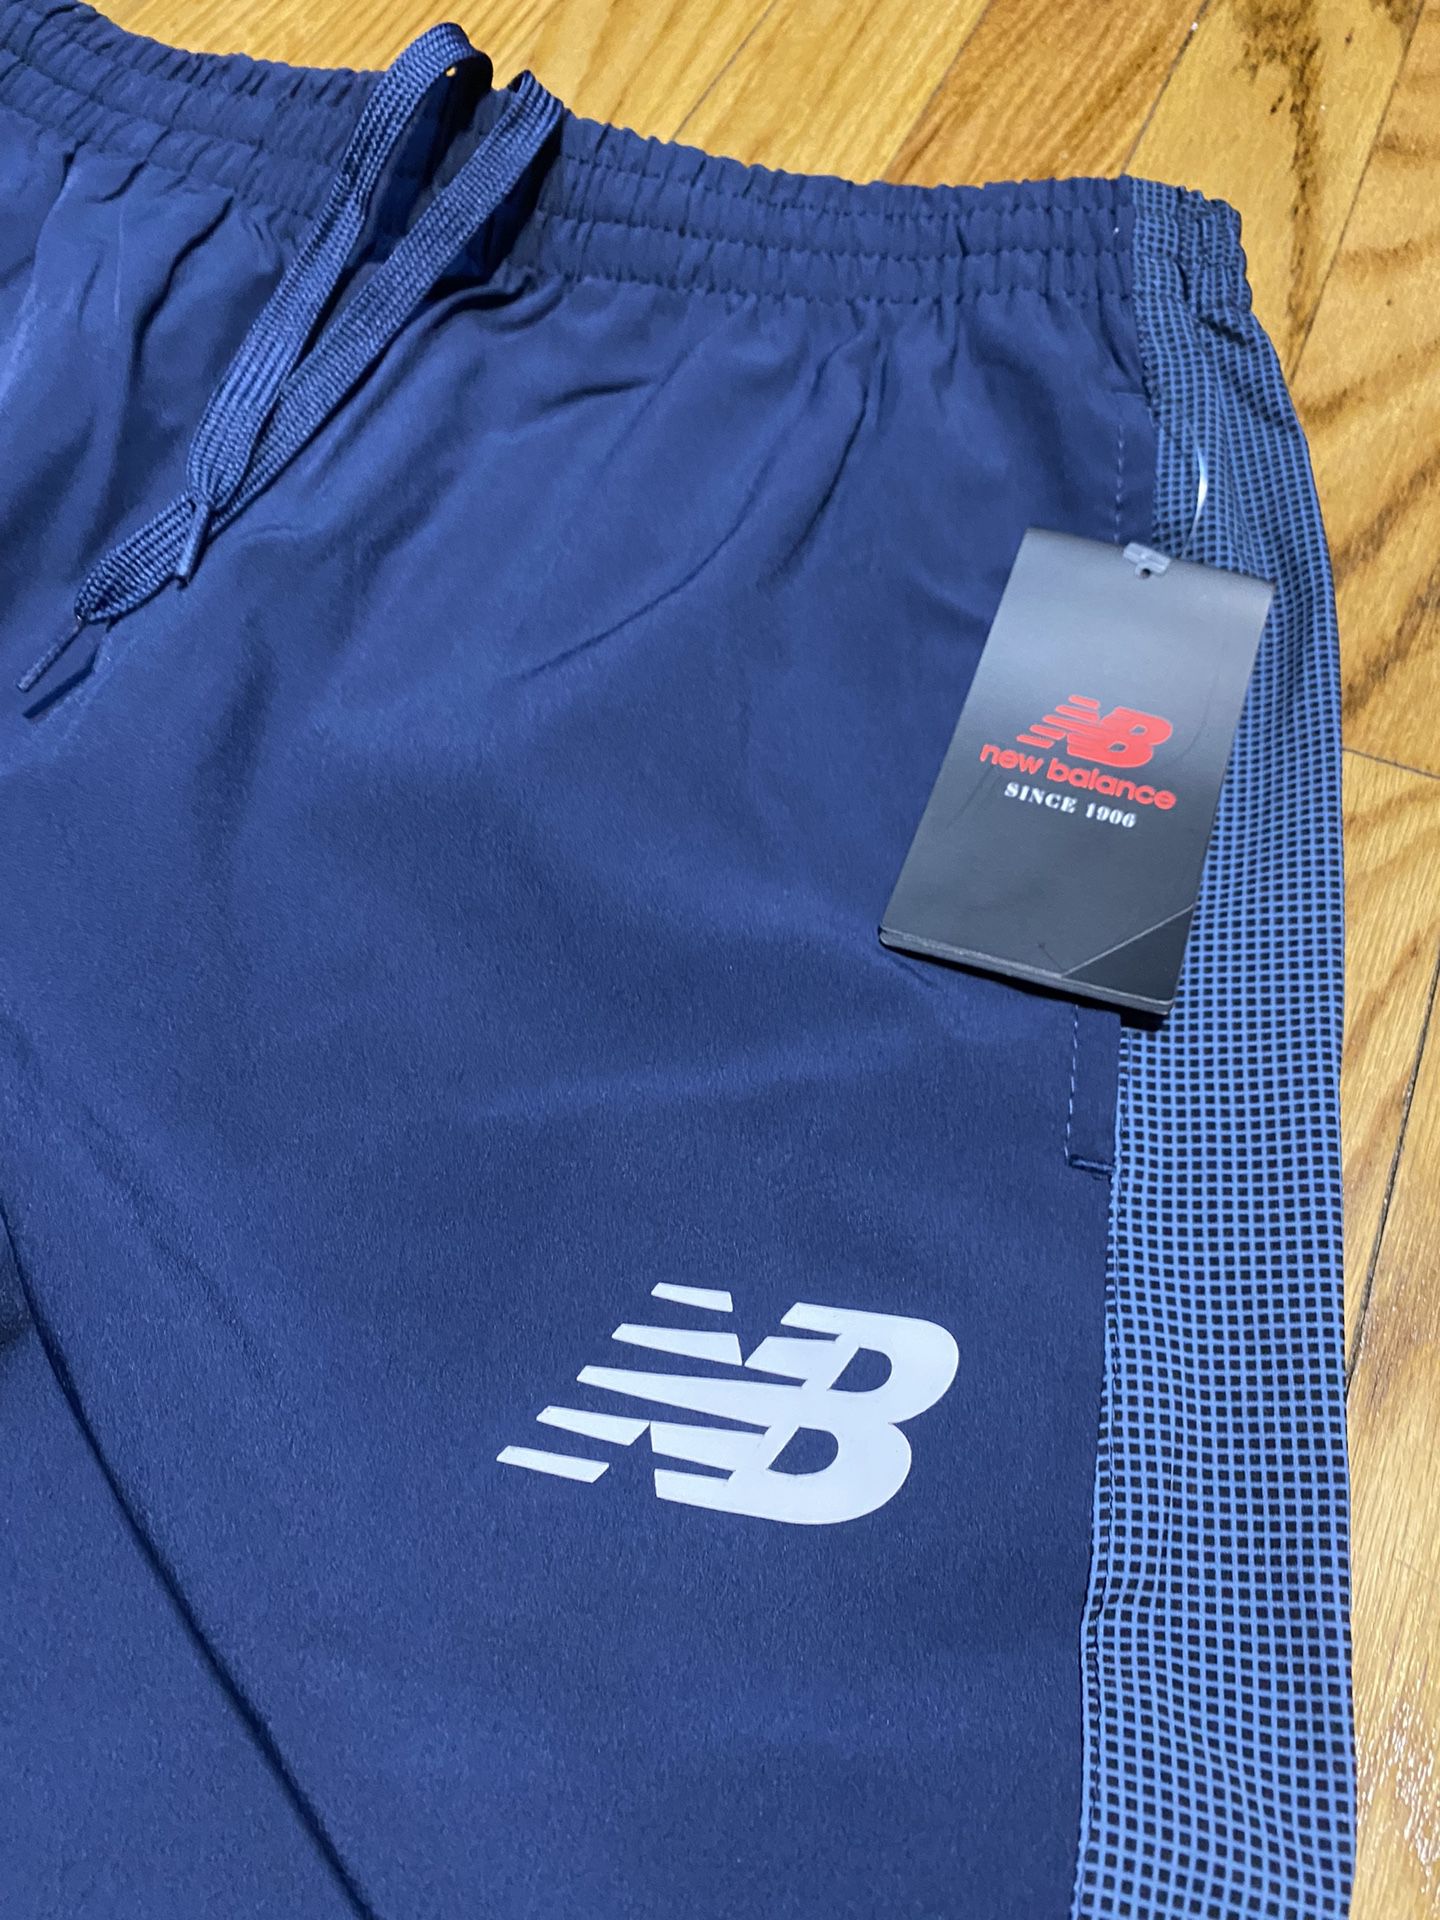 Mens New Balance All Motion 4-Way Stretch Running Wind PANTS Size Xl for  Sale in Mcallen, TX - OfferUp